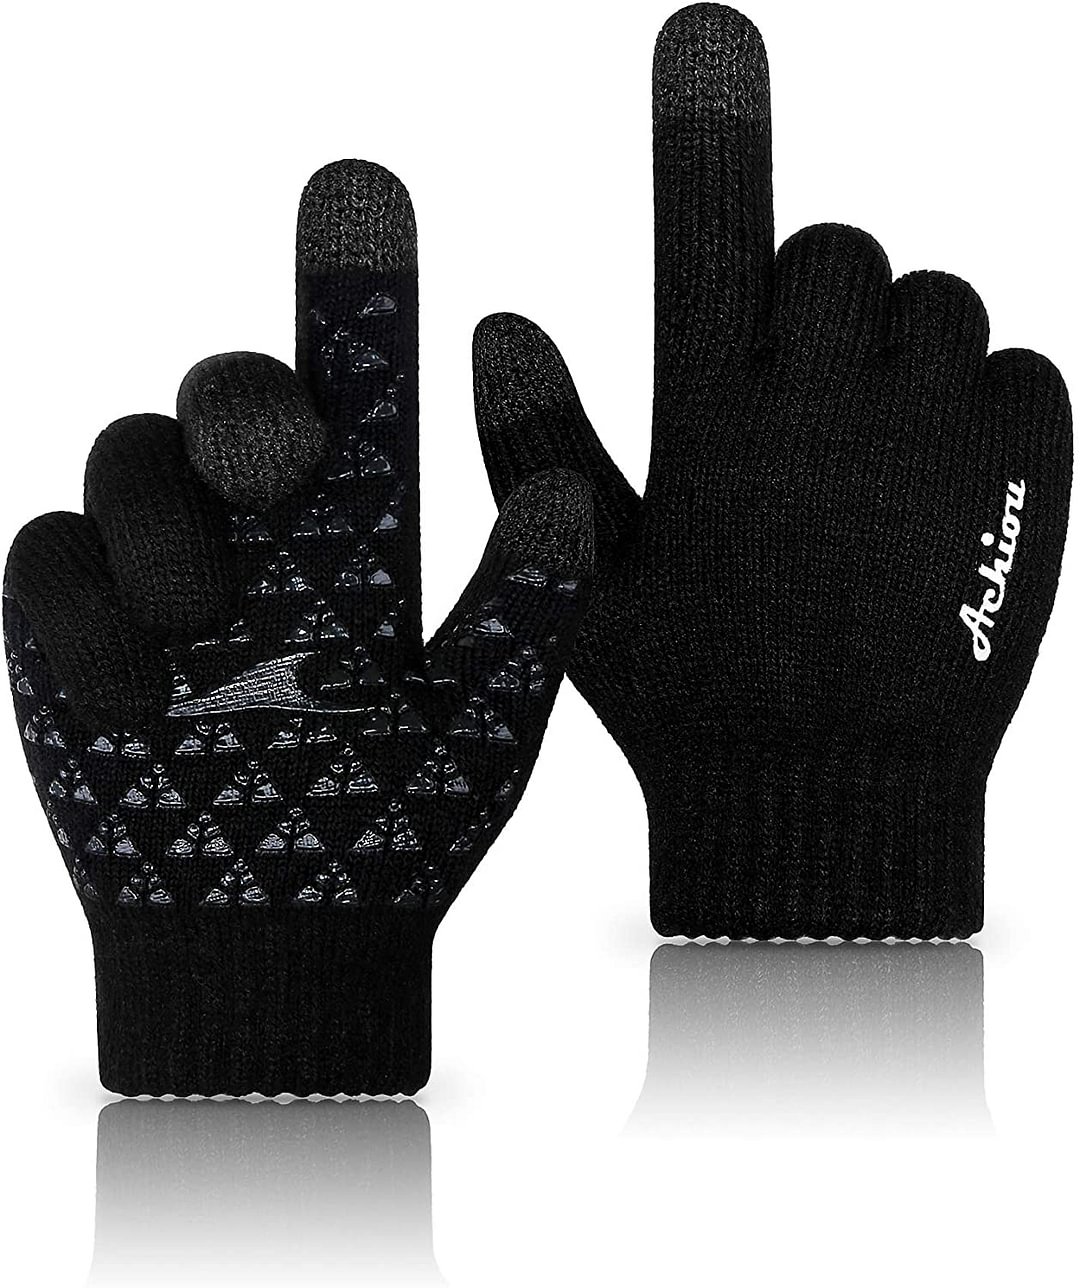 Winter Knit Gloves Thicken Warm Touchscreen Thermal Soft Lining Texting Generation Ⅱ Upgraded